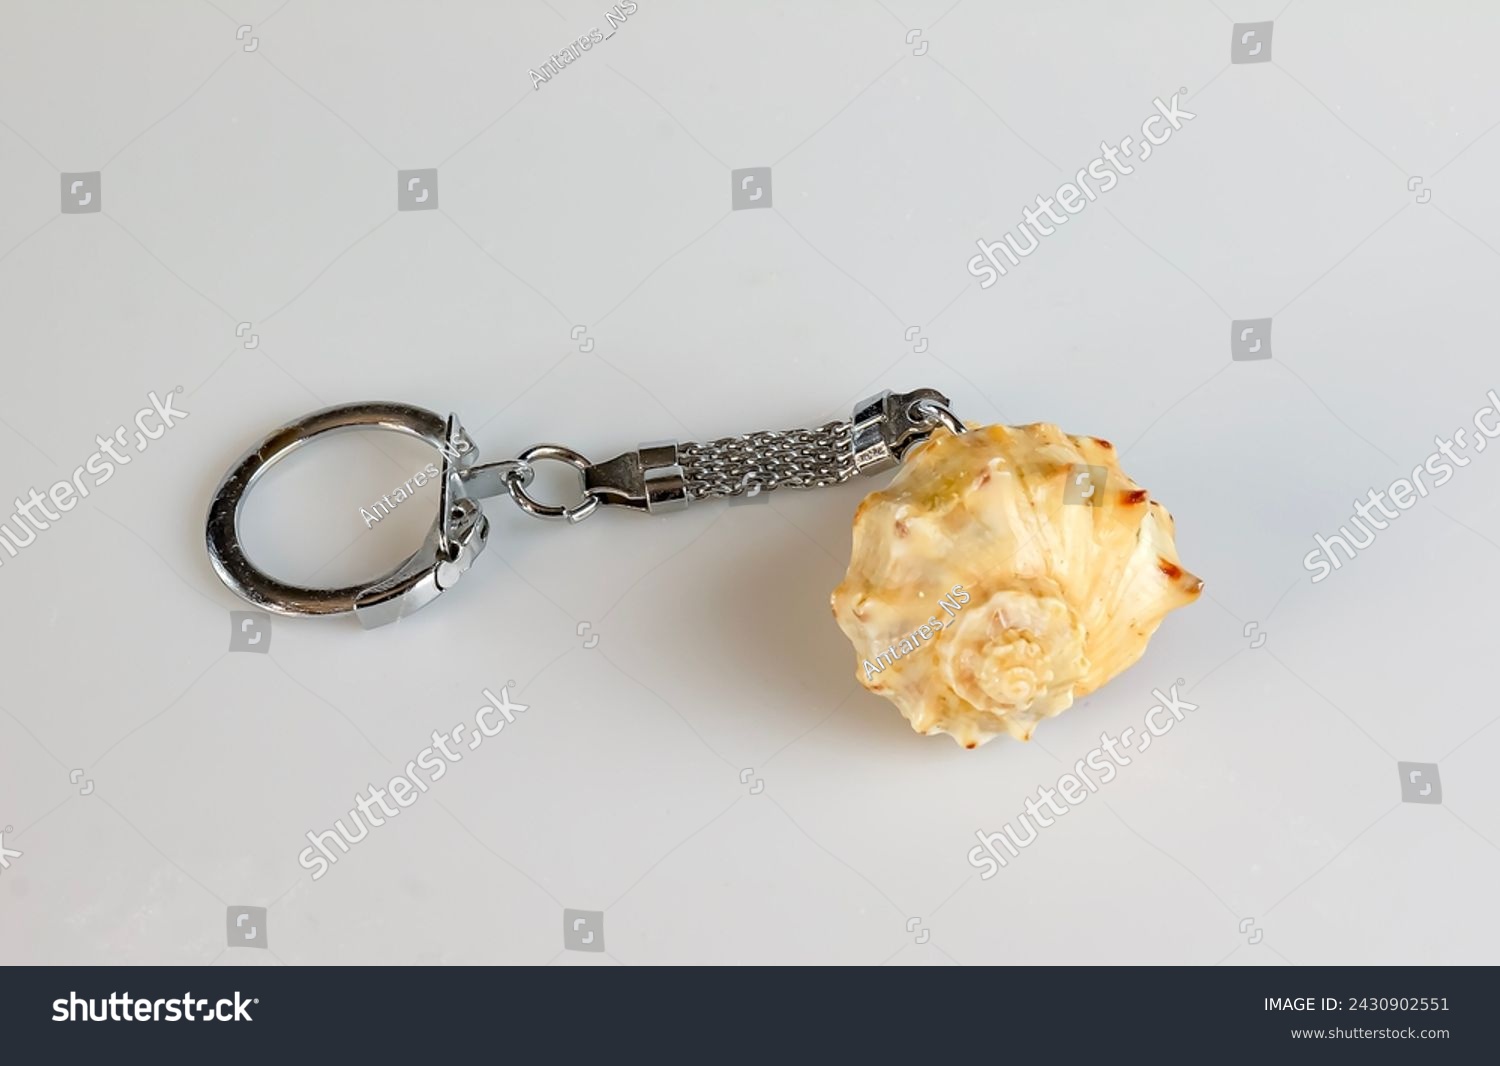 Keychain with rapana shell on a white background. #2430902551